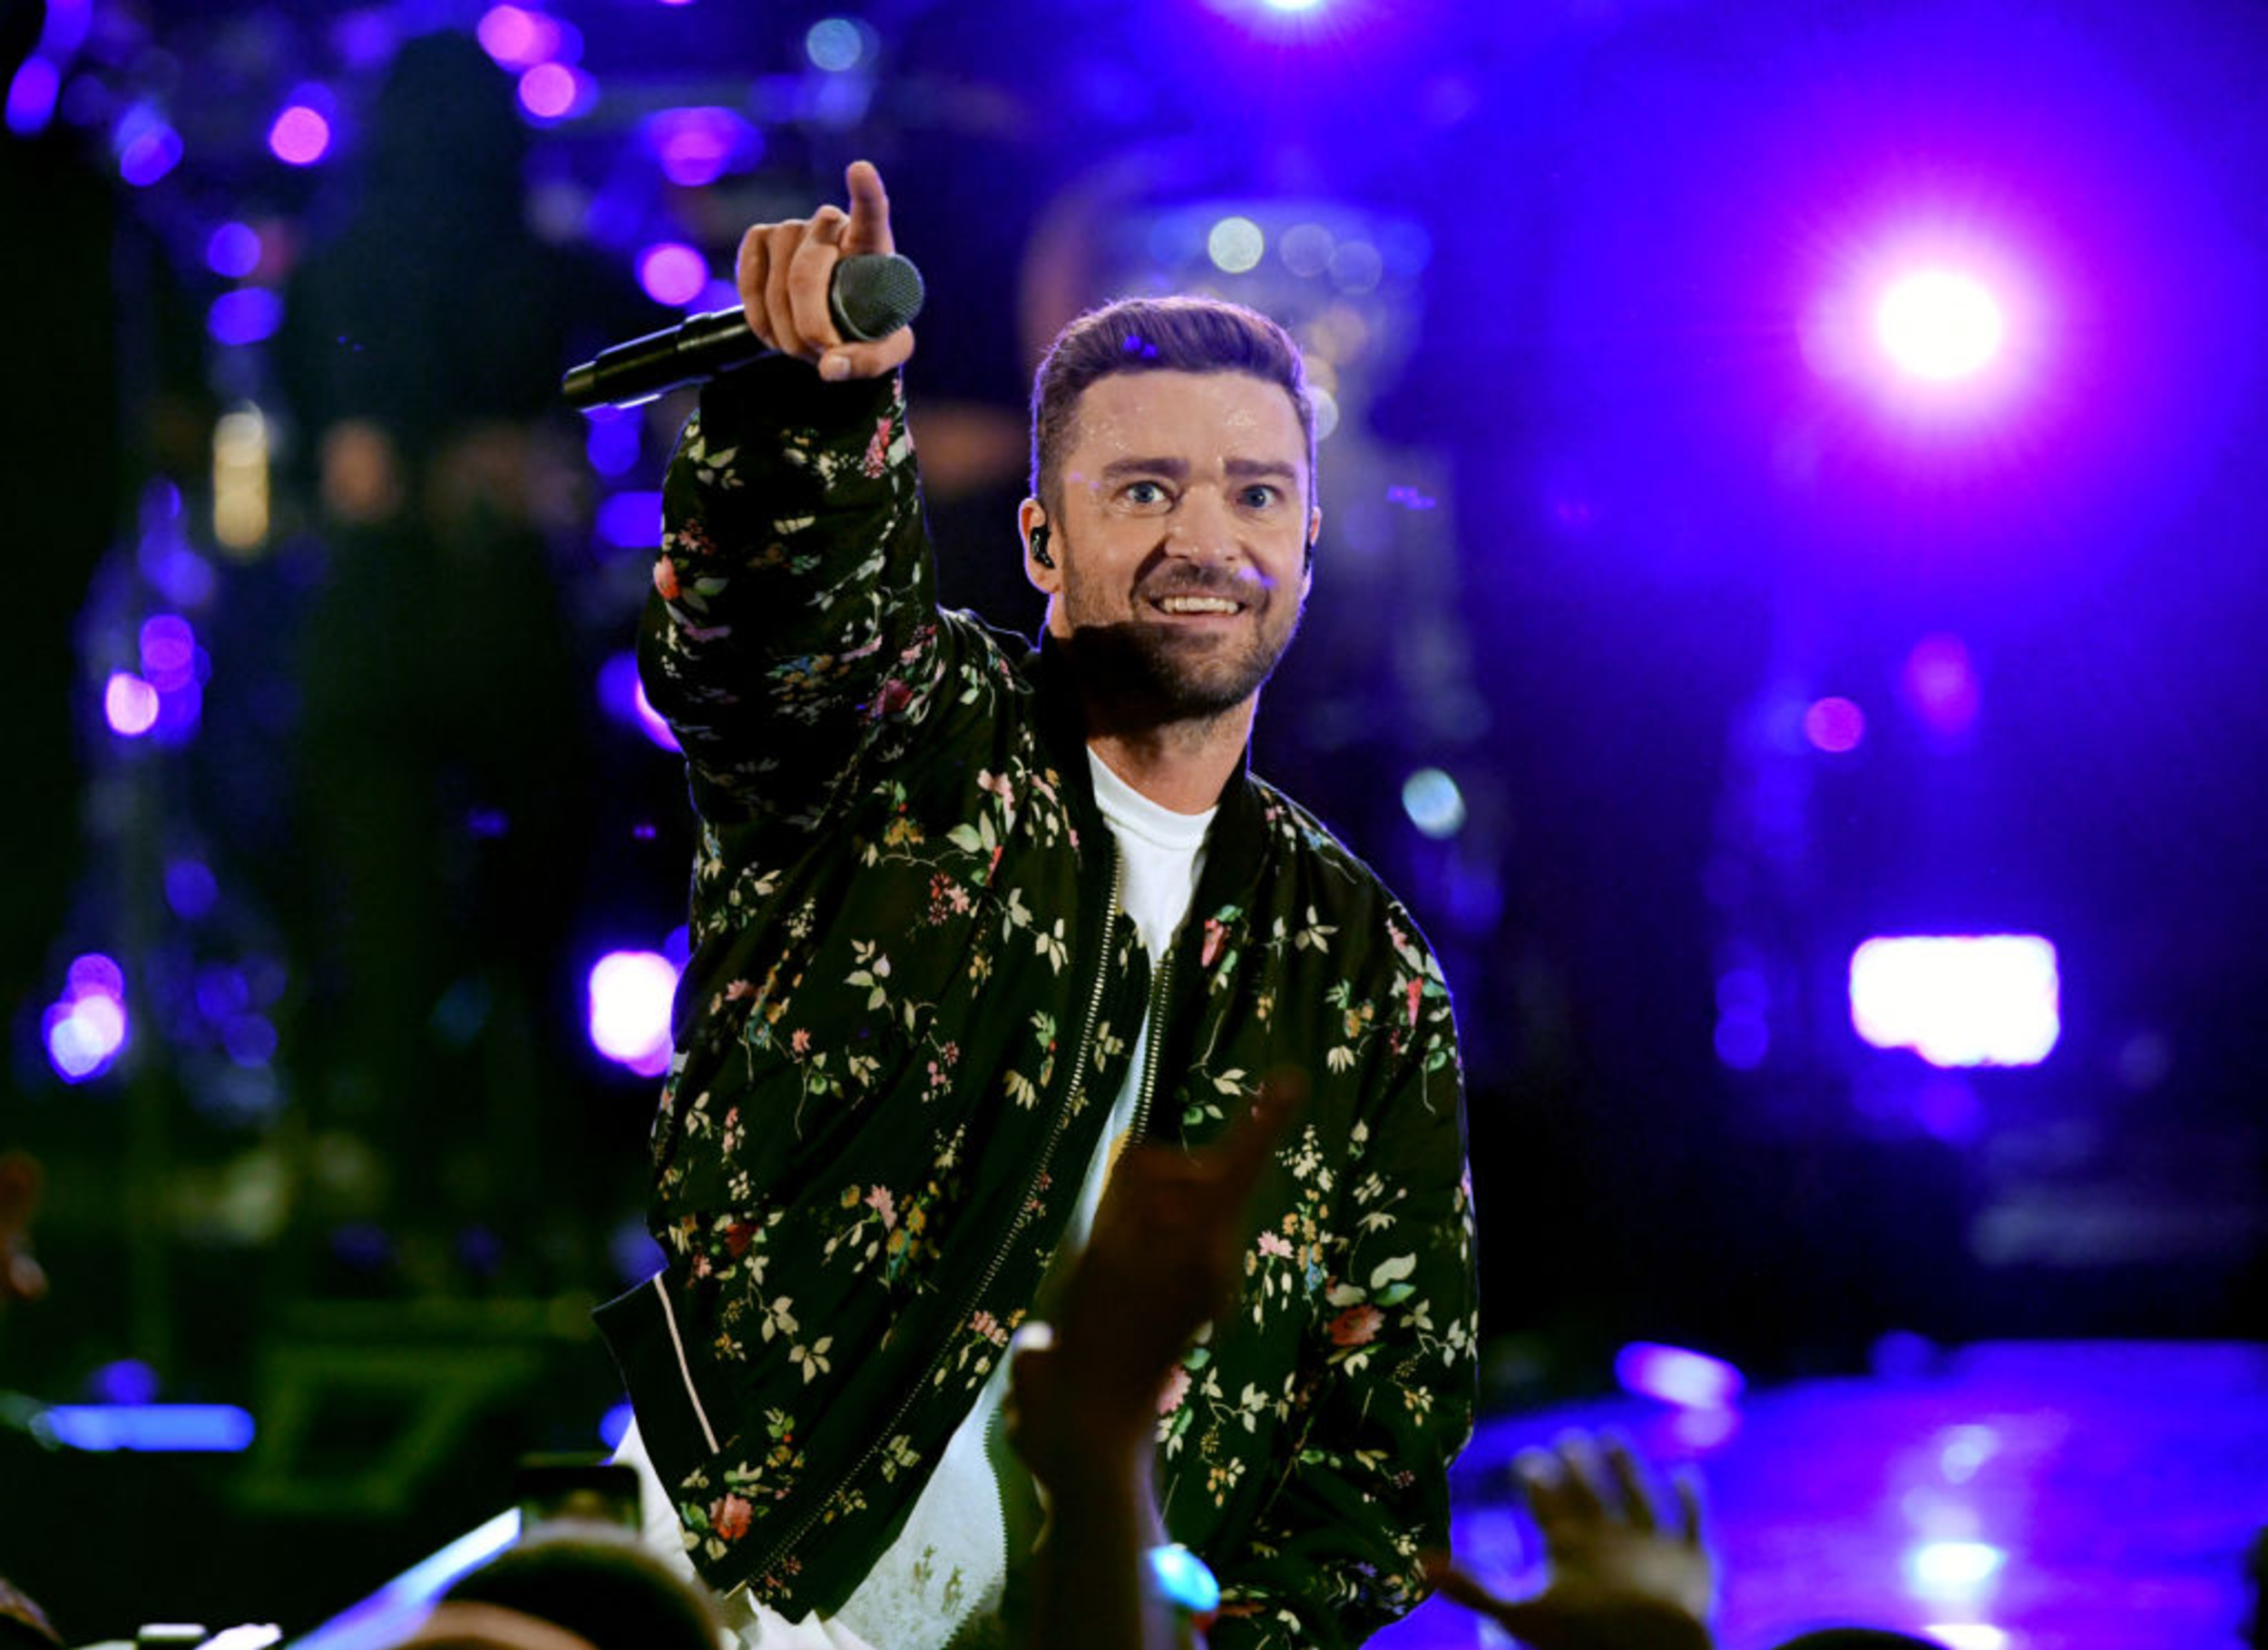 <p>After a six-year hiatus since his previous album <em>Man of the Woods,</em> Justin Timberlake is back with his sixth studio album <em>Everything I Thought I Was. </em>In support of his new album, Timberlake is hitting the road across North America with his "The Forget Tomorrow World Tour." The singer will start his trek on April 29th in Vancouver and end on July 9th in Kentucky. </p><p>You may also like: <a href='https://www.yardbarker.com/entertainment/articles/horror_ble_21_terrible_scary_movies_we_still_love_to_watch_022924/s1__38499797'>Horror-ble: 21 terrible scary movies we still love to watch</a></p>